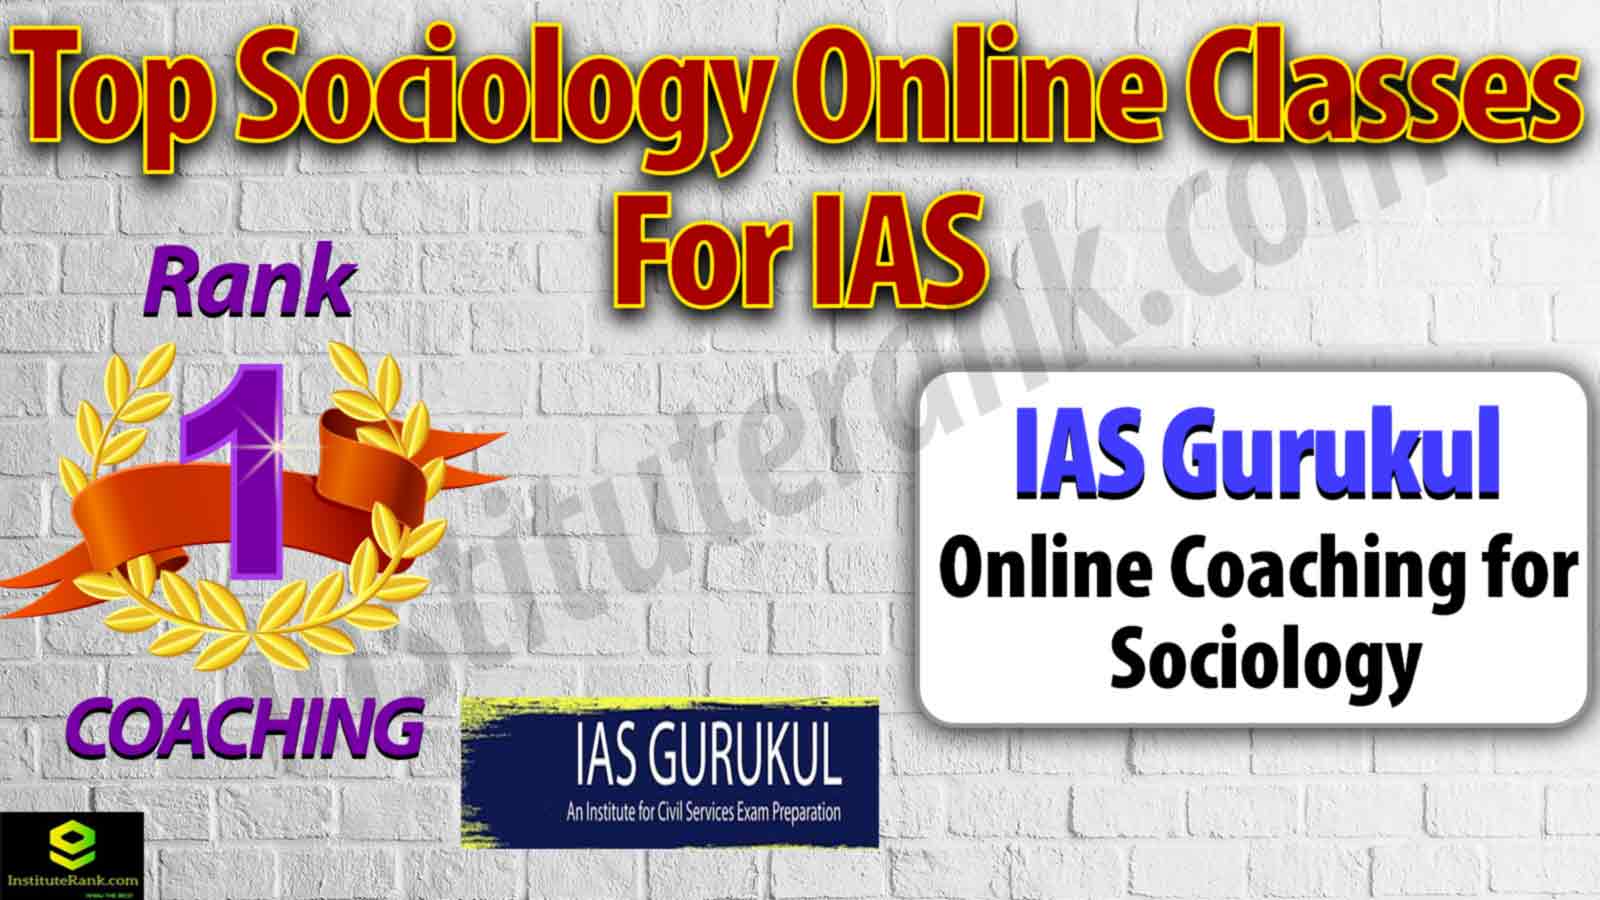 Top Sociology Online Classes for IAS